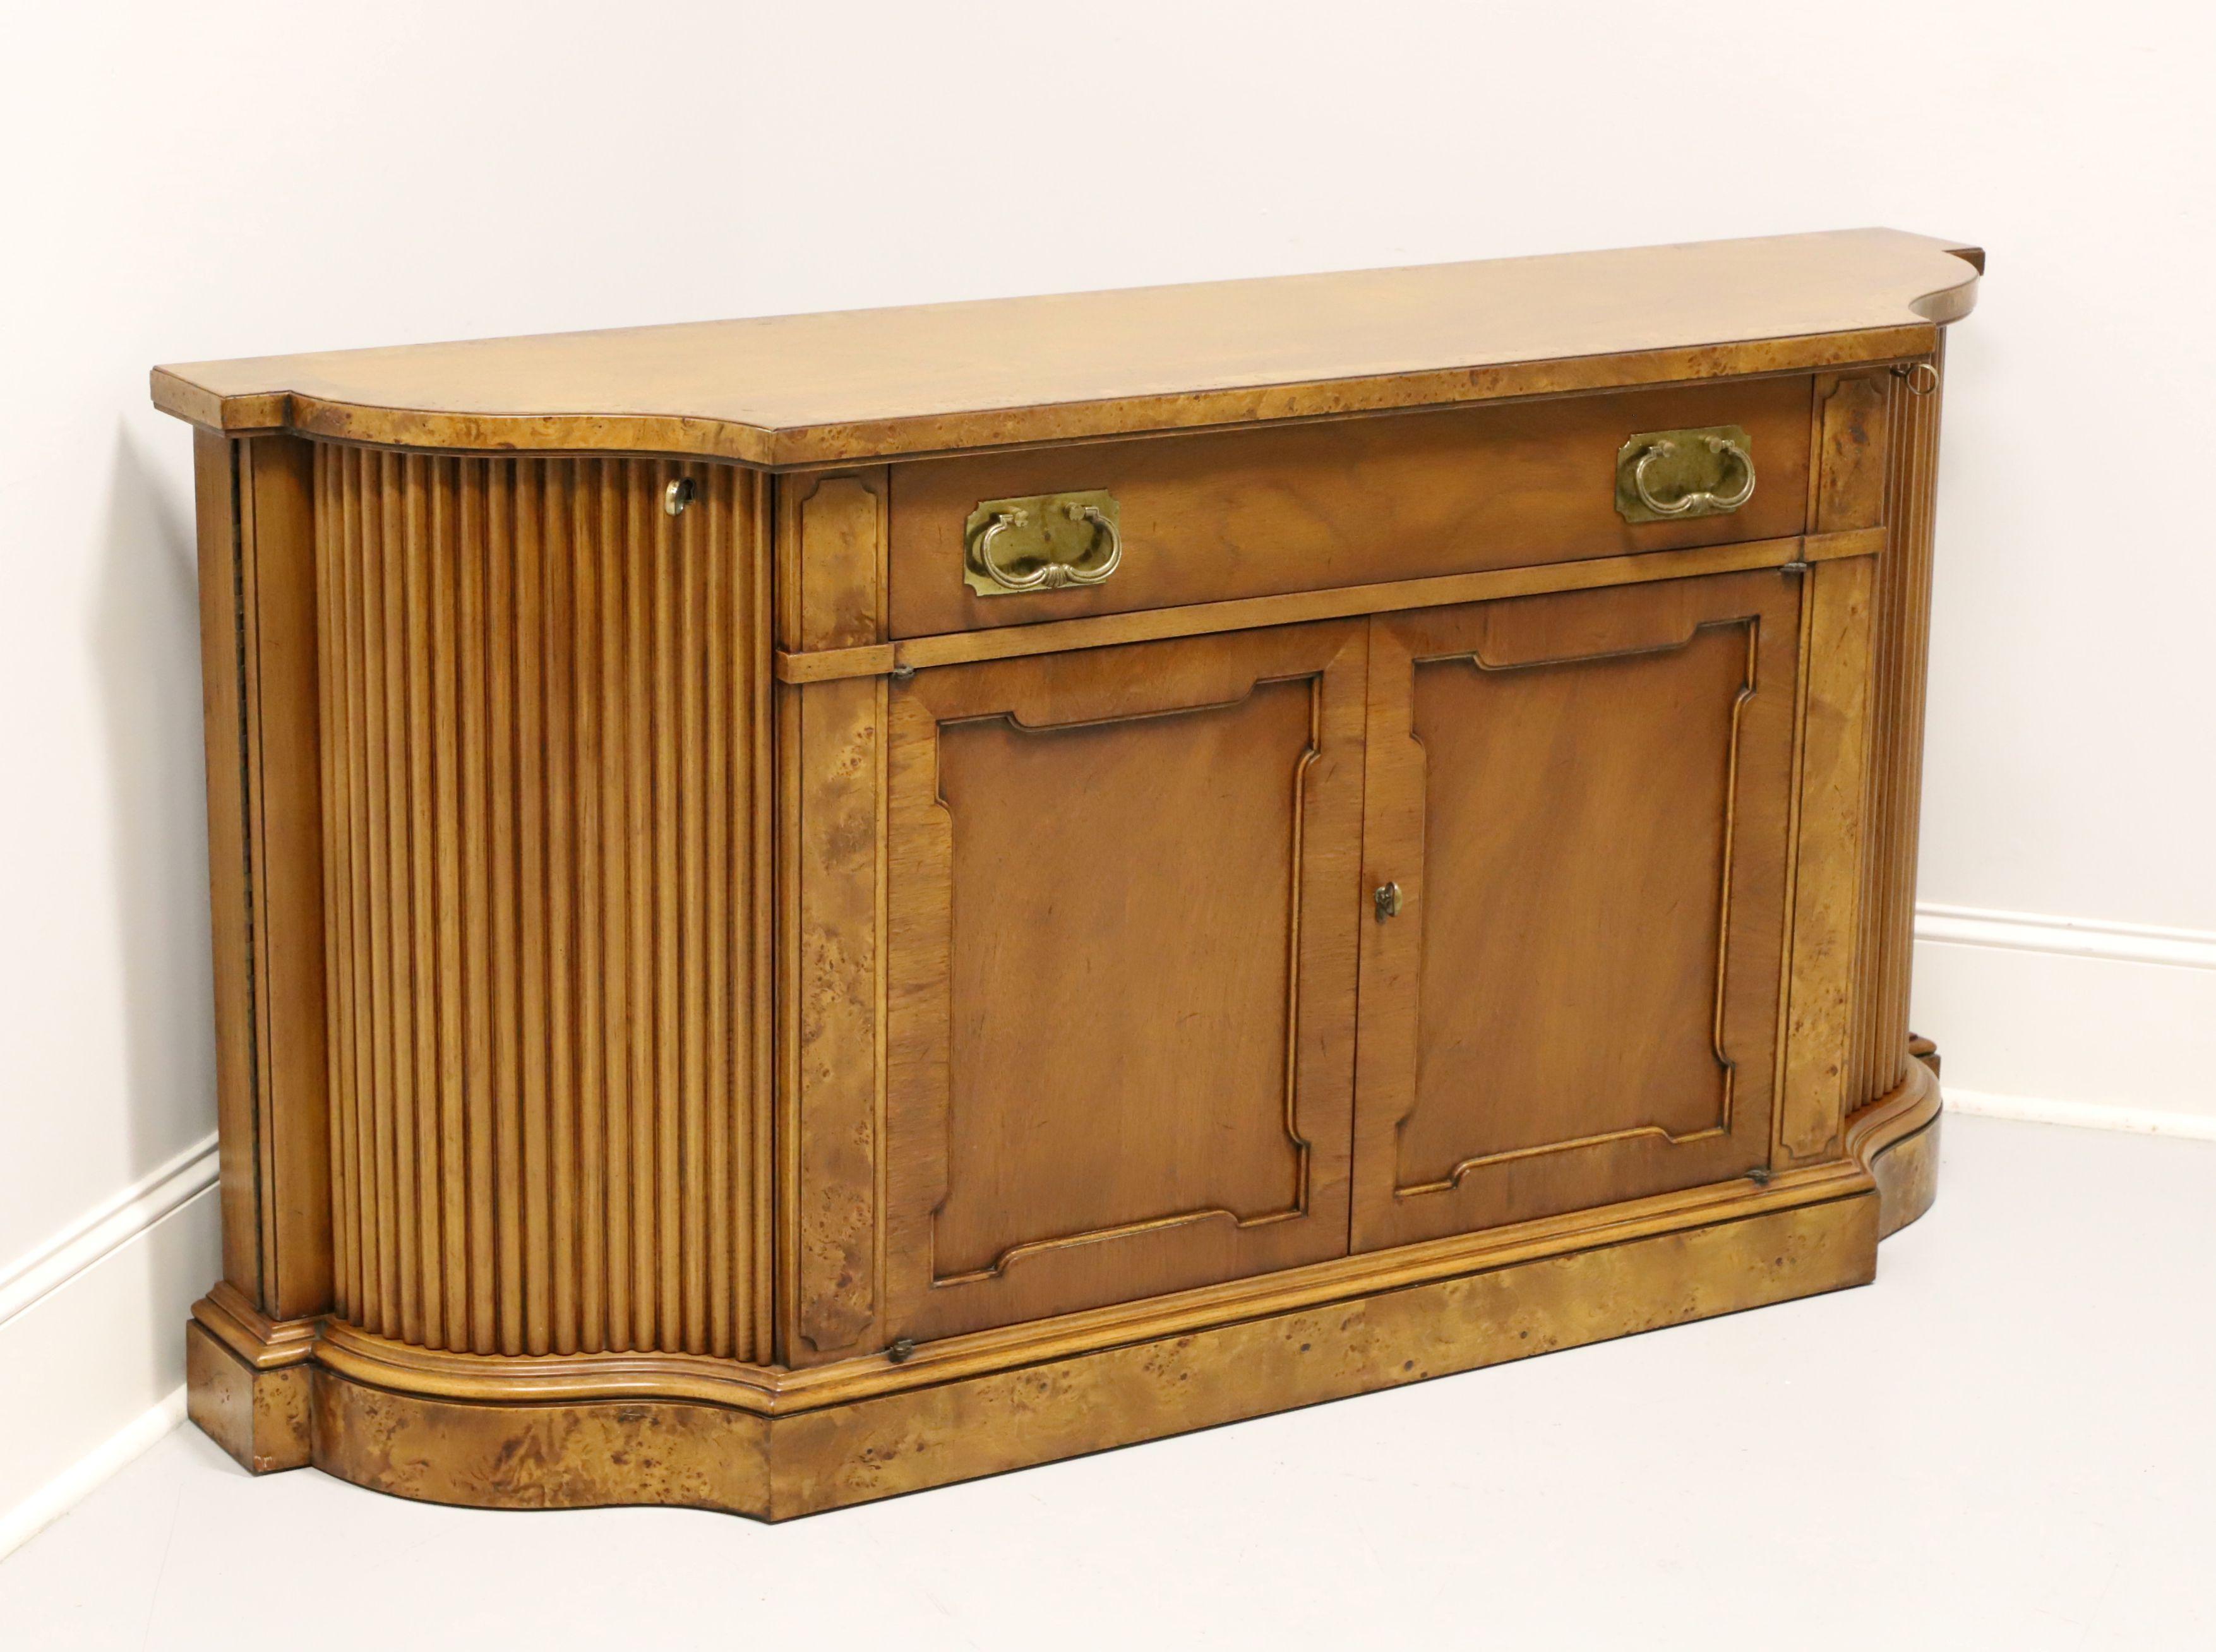 A Neoclassical style buffet server by Tomlinson Furniture. Mahogany with their Nutmeg finish, burlwood banding to top, serpentine front, brass hardware, burlwood accents flanking doors and to the base. Features one center drawer of dovetail